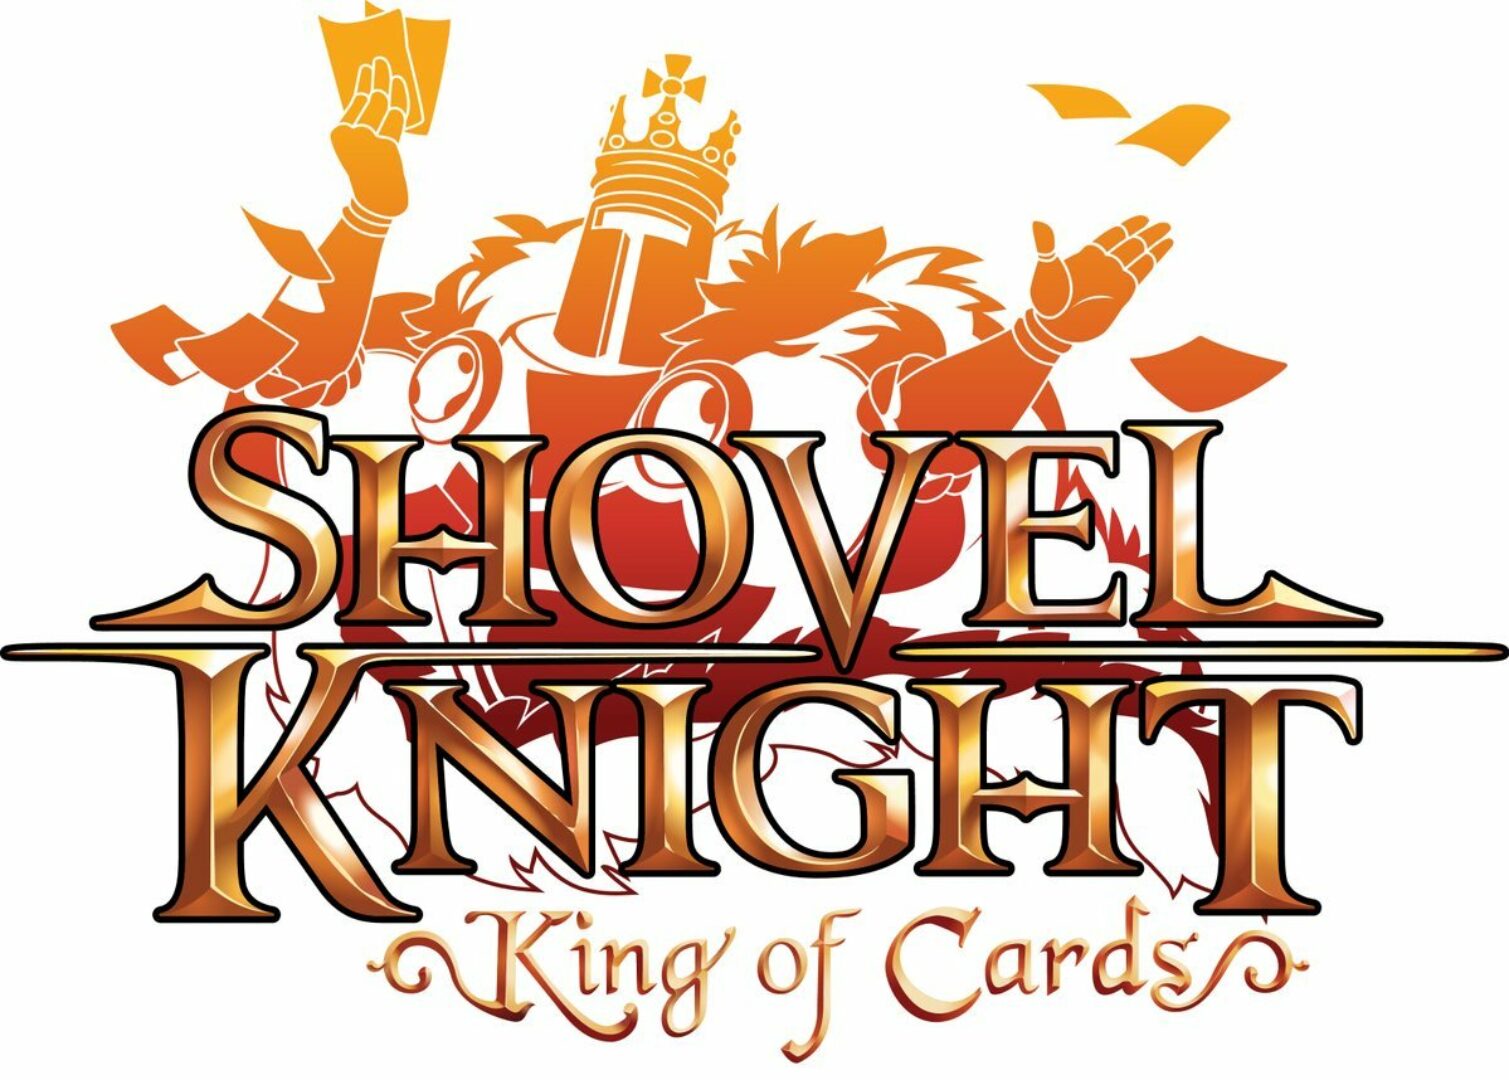 Shovel Knight: King of Cards Arriving In Early 2018